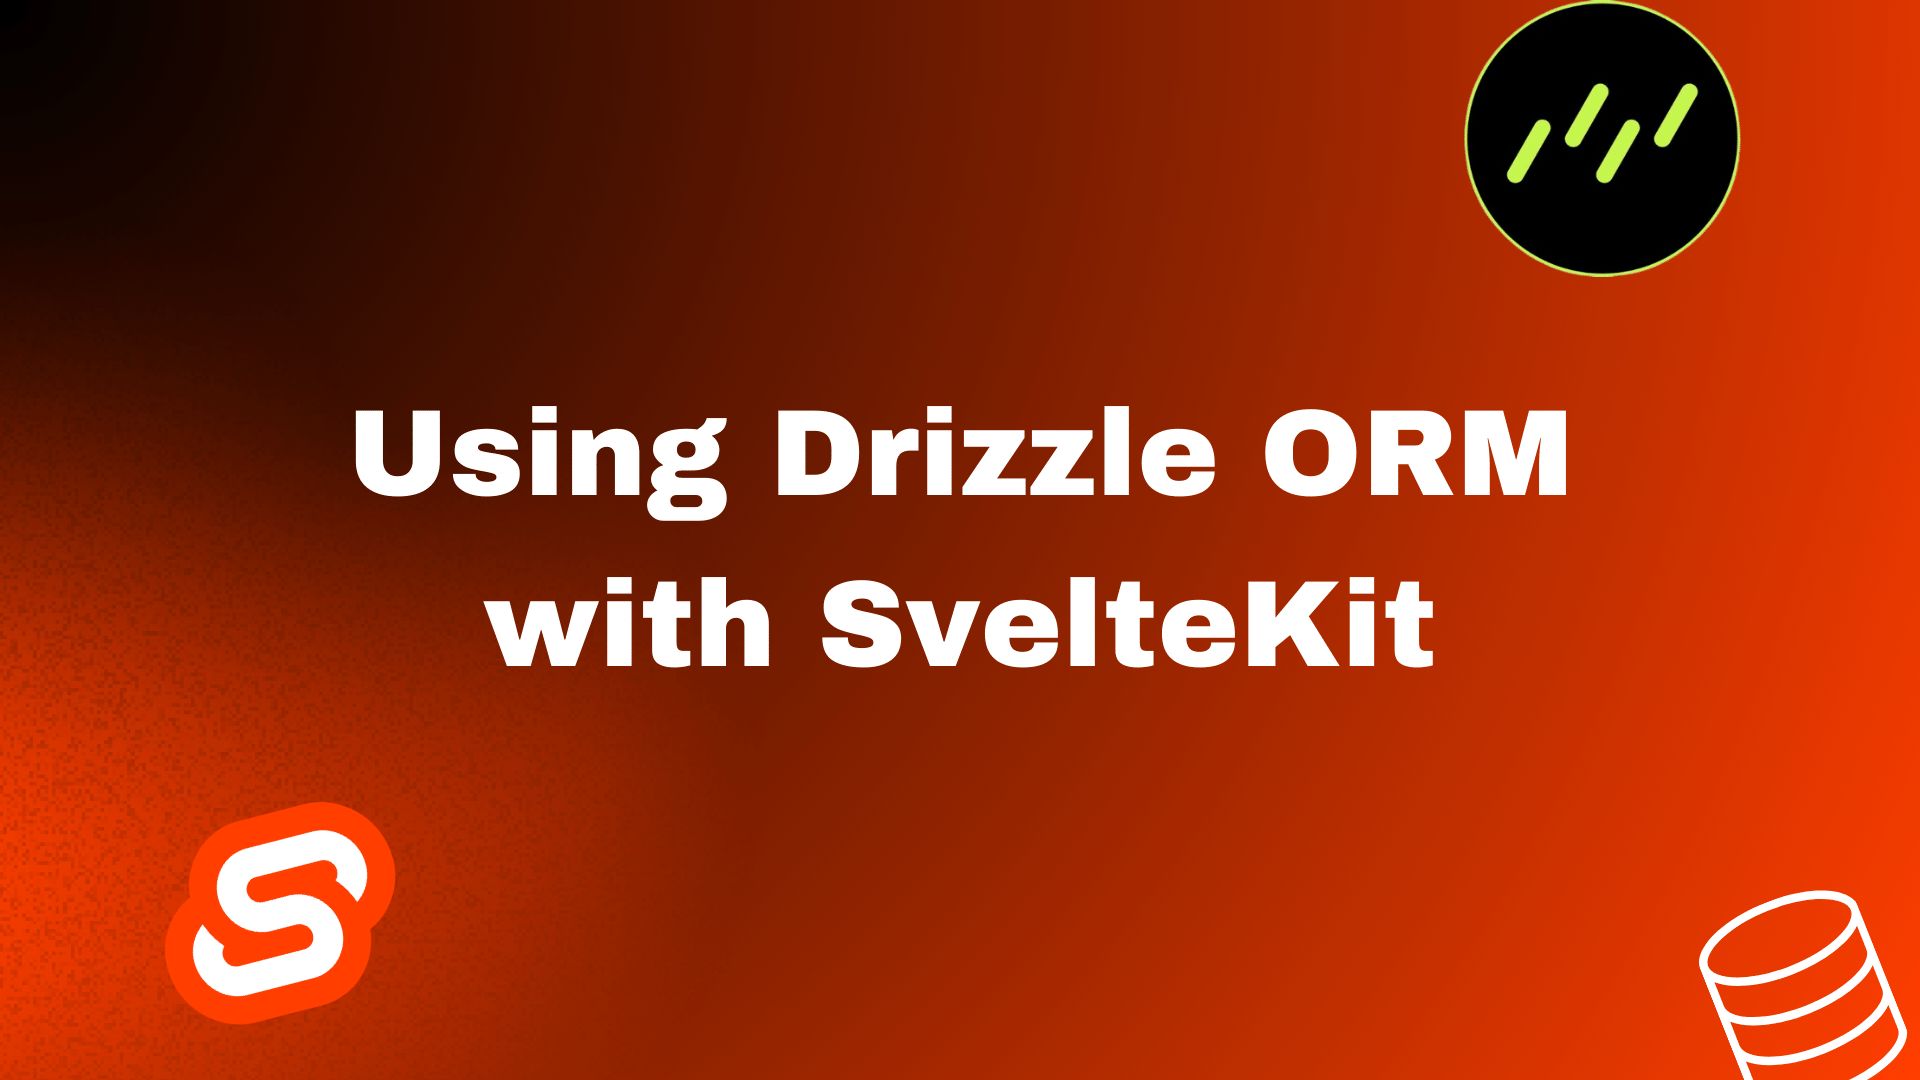 Drizzle ORM with SvelteKit image